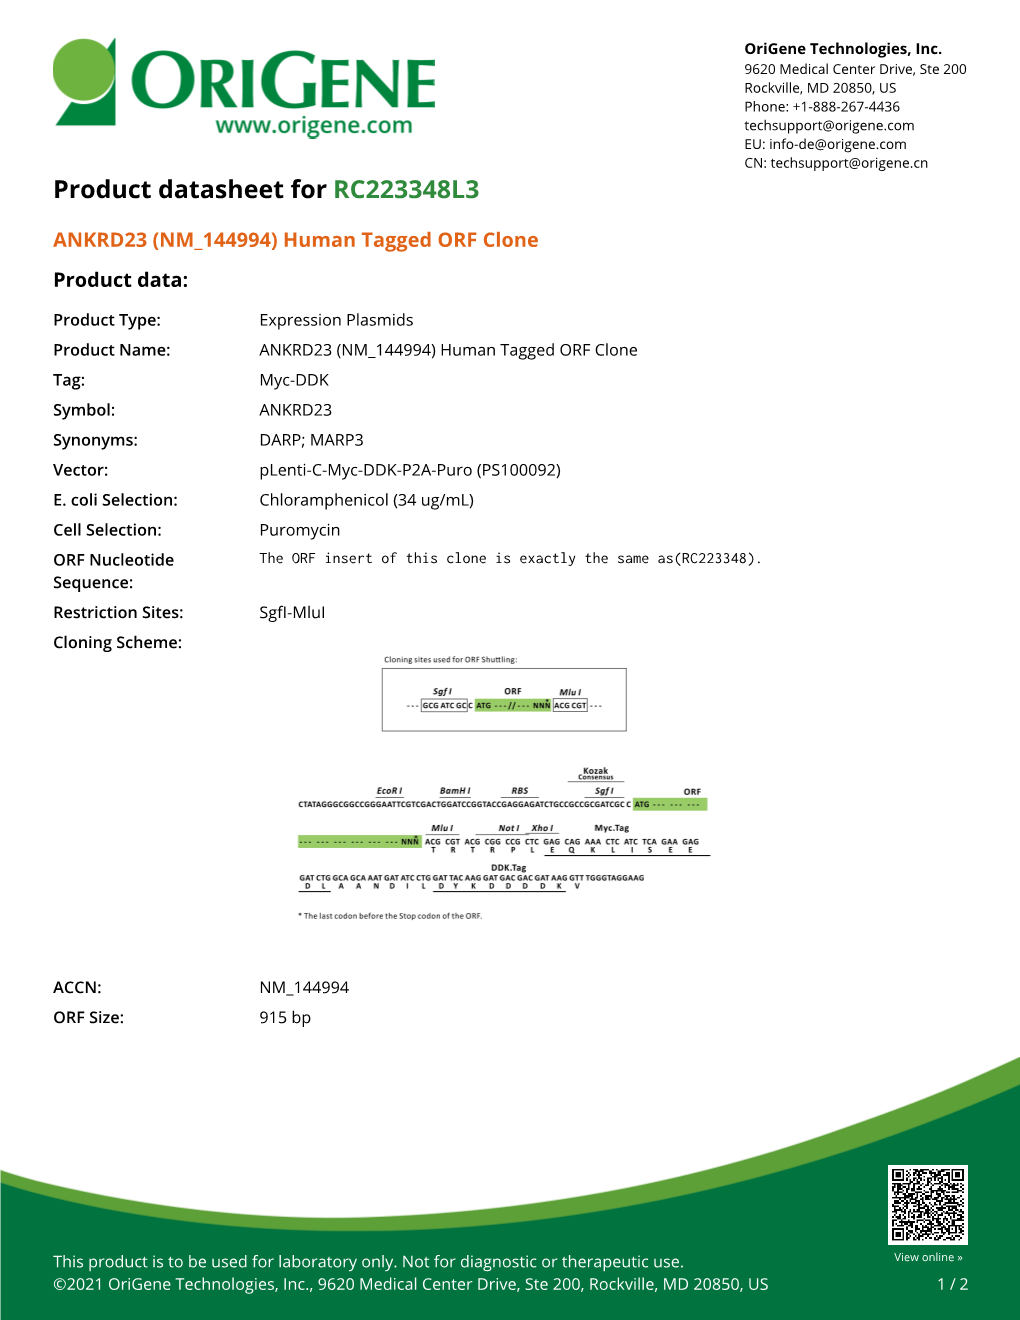 ANKRD23 (NM 144994) Human Tagged ORF Clone Product Data